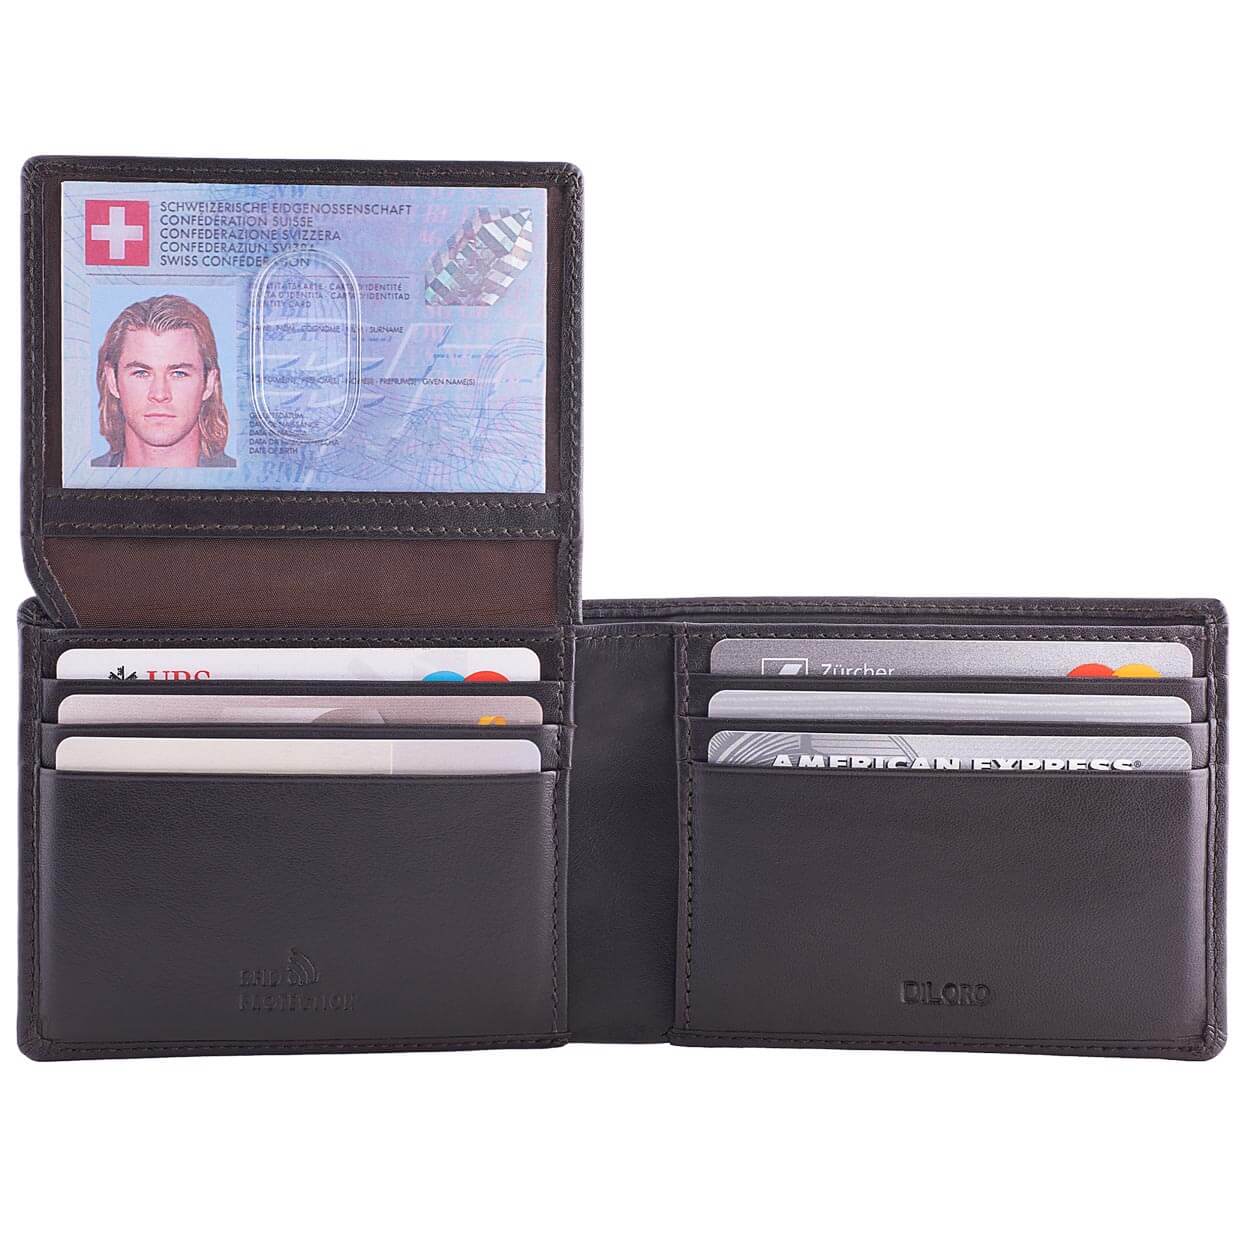 Brown Bifold Wallet for Men With ID Window and RFID Blocking